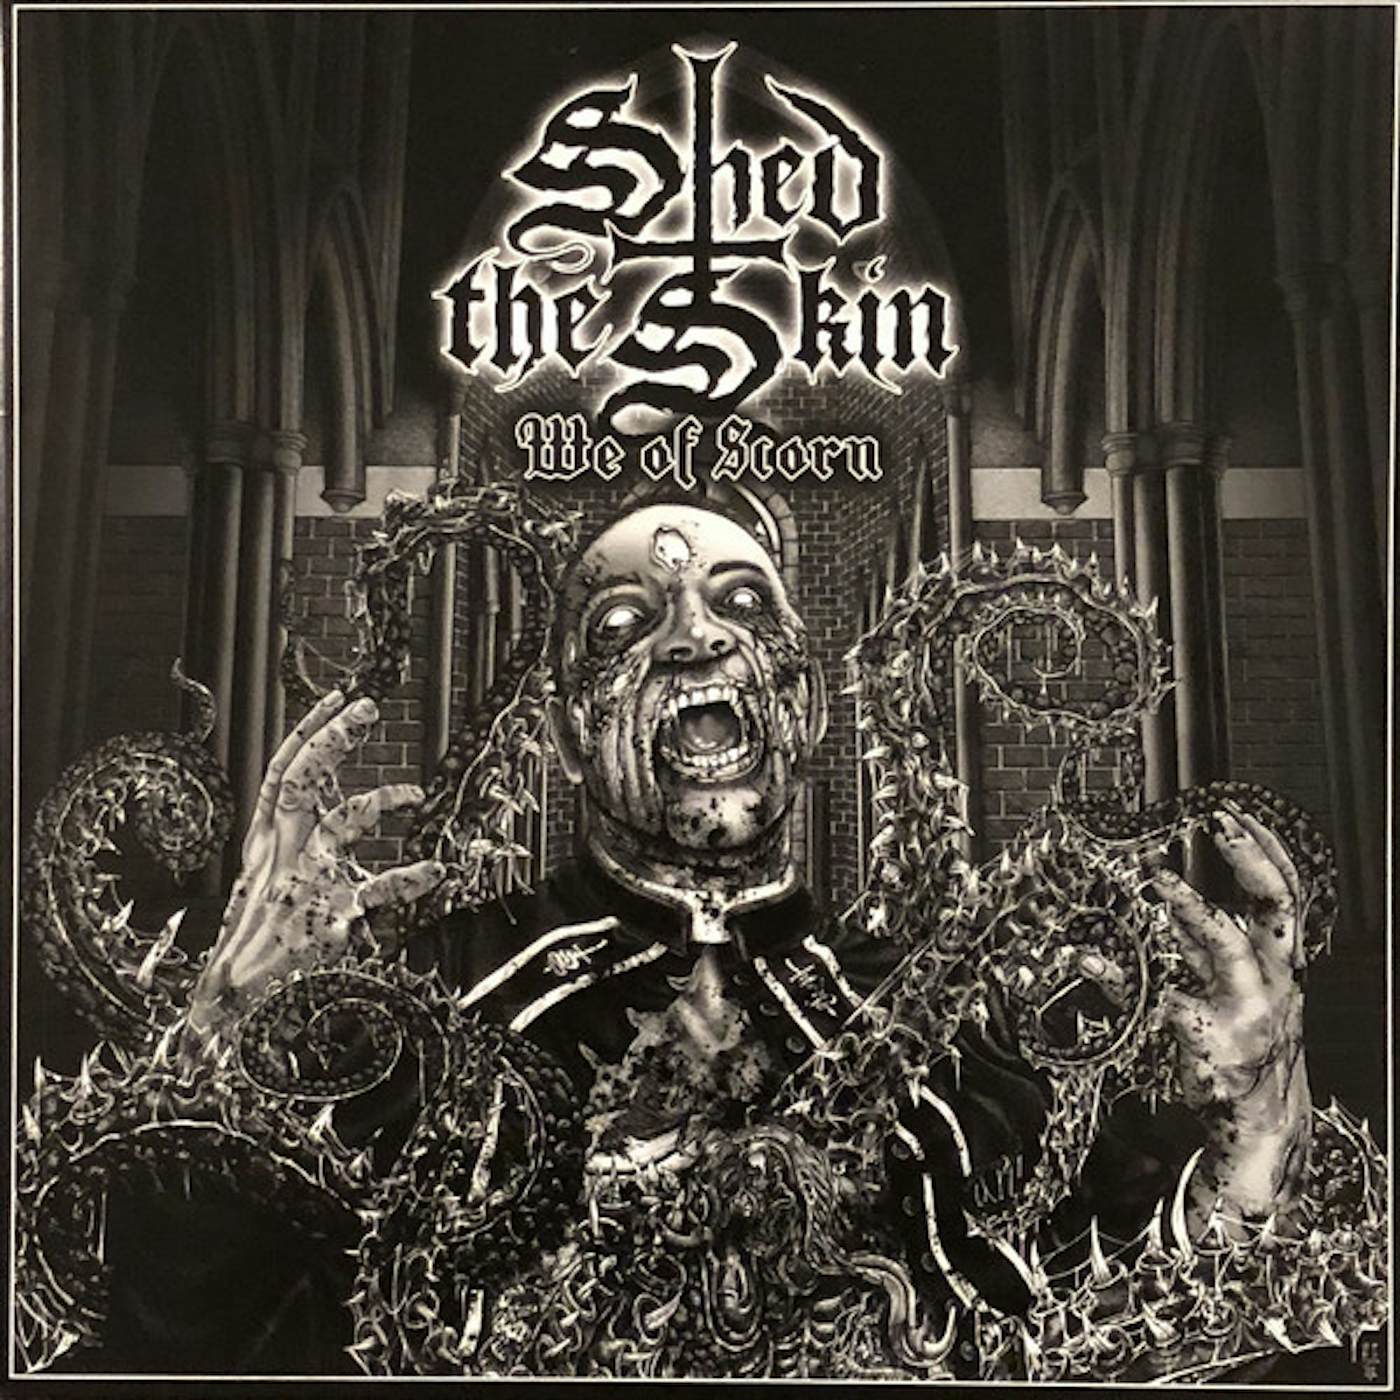 Shed the Skin We Of Scorn Vinyl Record